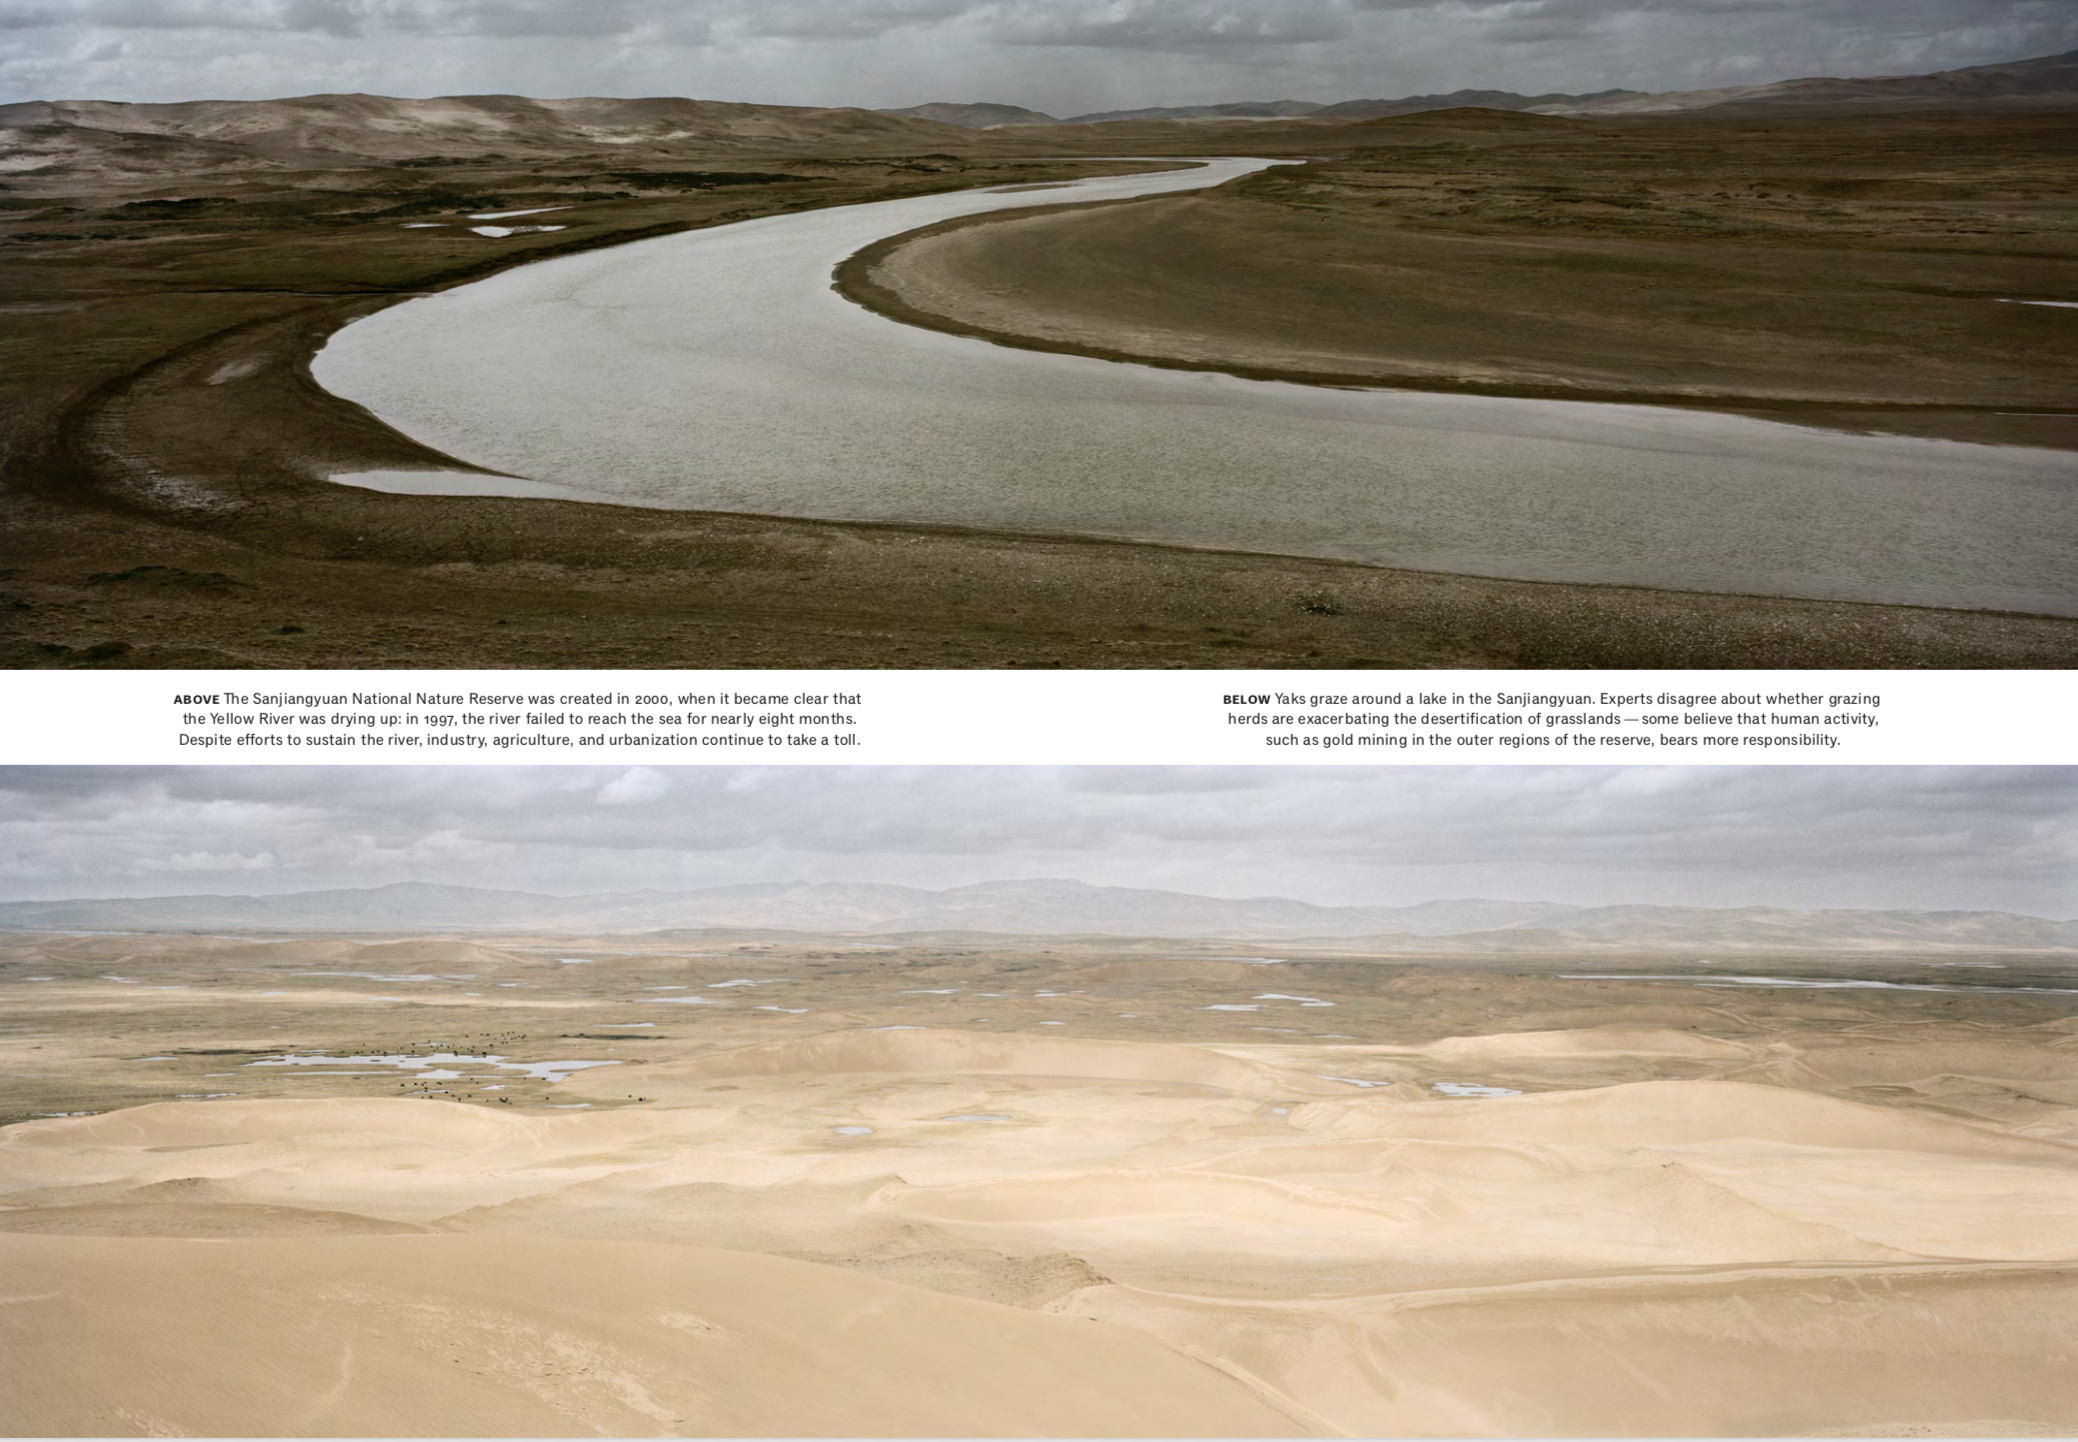 Above: The Sanjiangyuan National Nature Reserve was created in 2000, when it became clear that the Yellow River was drying up: in 1997, the river failed to reach the sea for nearly eight months. Despite efforts to sustain the river, industry, agriculture, and urbanization continue to take a toll. Images by Ian Teh. China, 2019.
